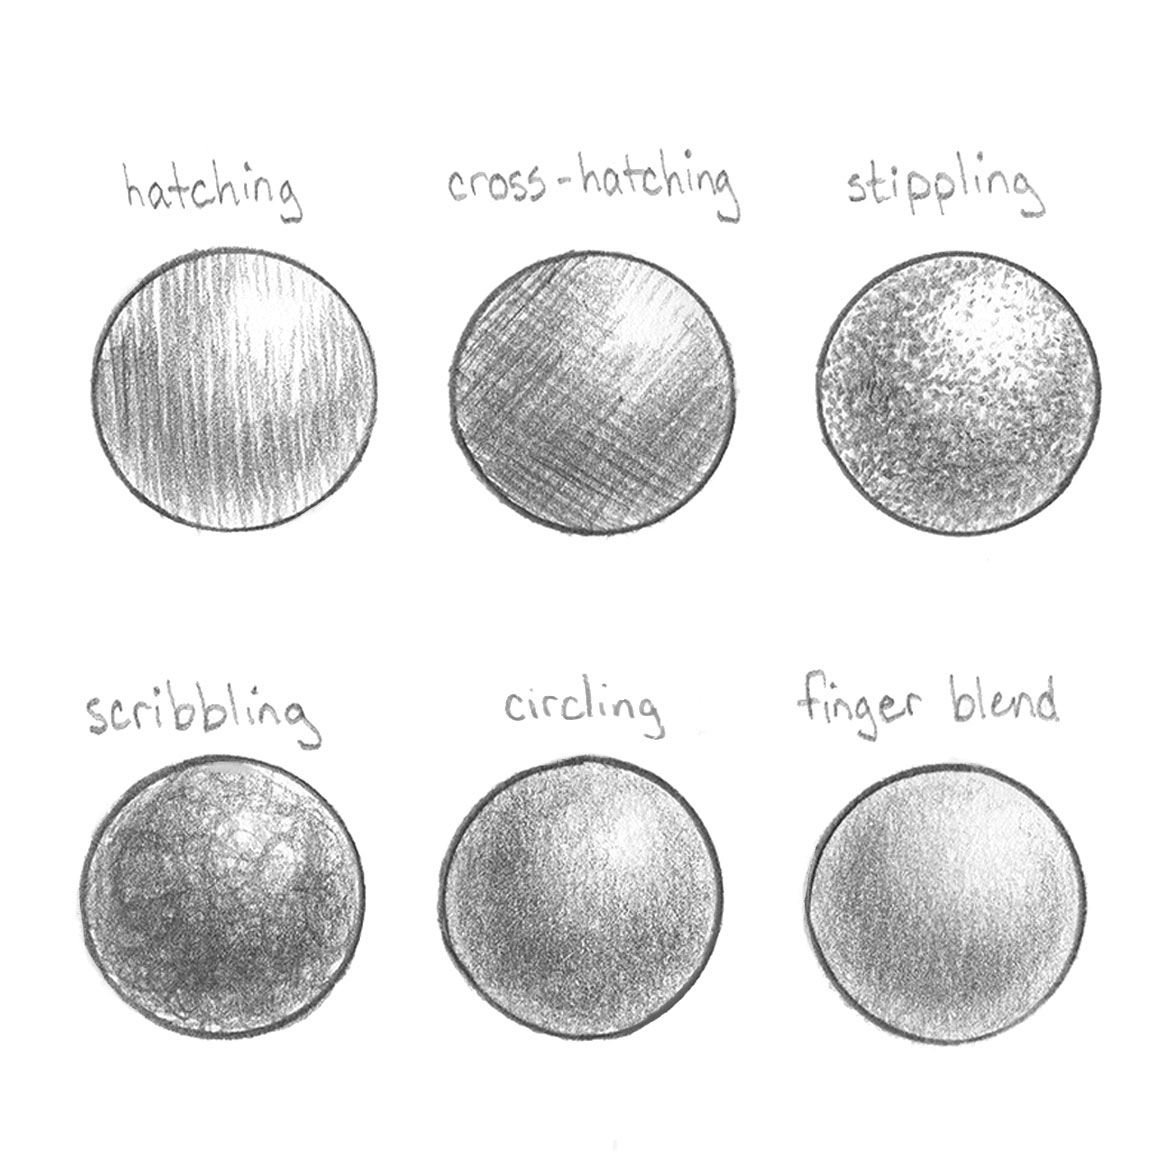 Pencil shading techniques 5 expert tips Creative content for